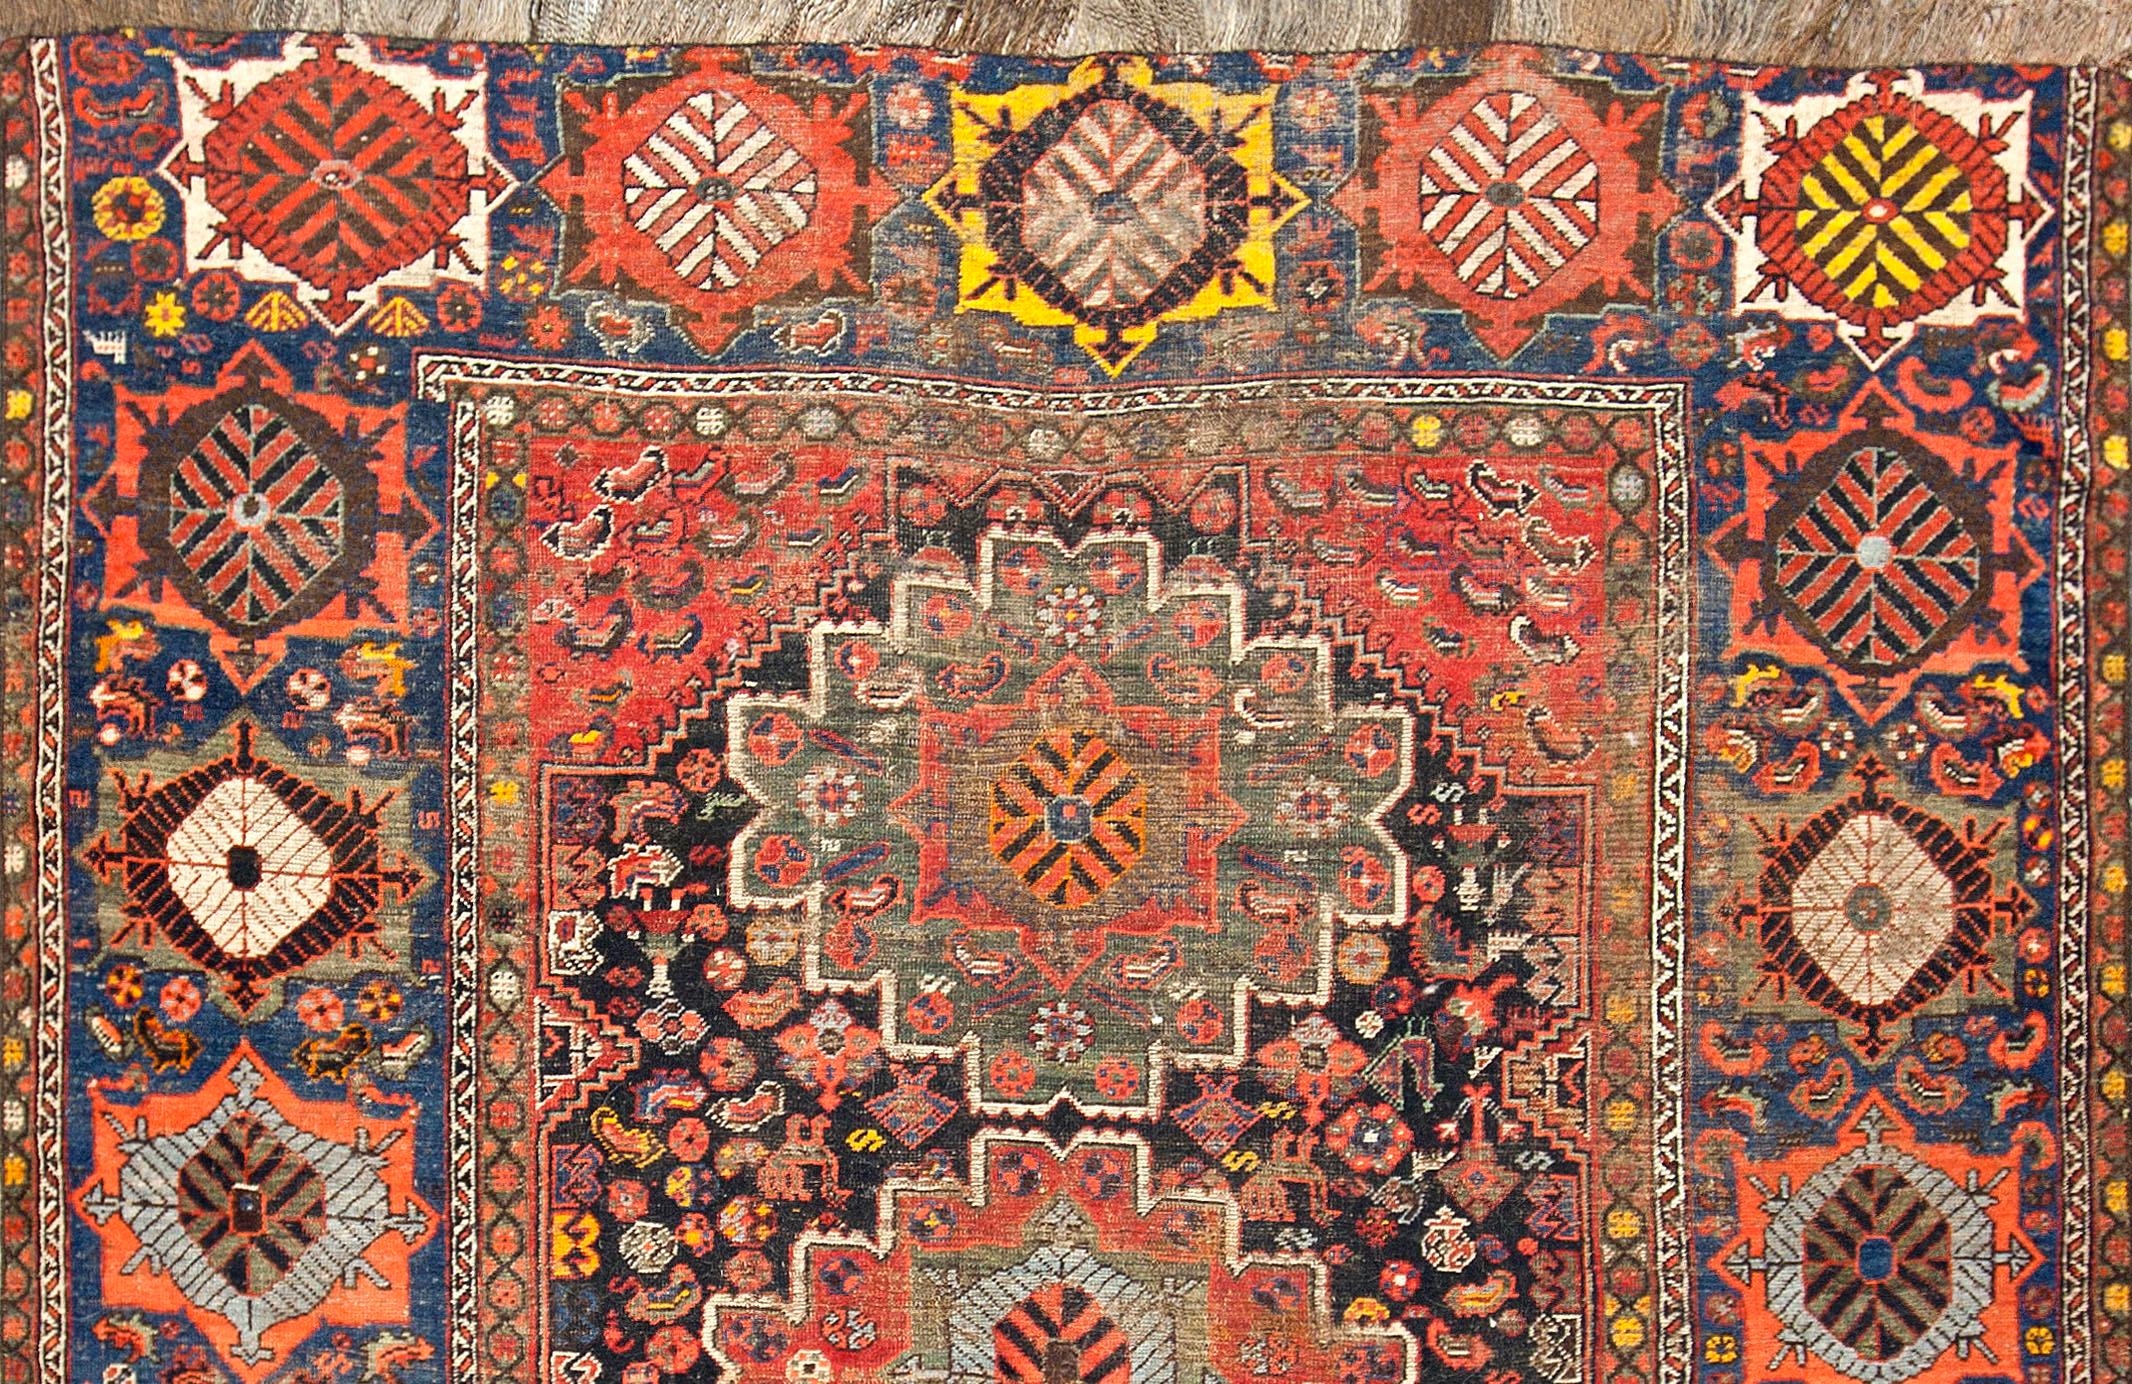 The wonderful design in this Qashqai, with the three bold floral heads sitting in the central field. All surrounded by similar but smaller designs in the border. The use of the strong yellows adds a unique feel to the piece. The Qashqai are a tribal